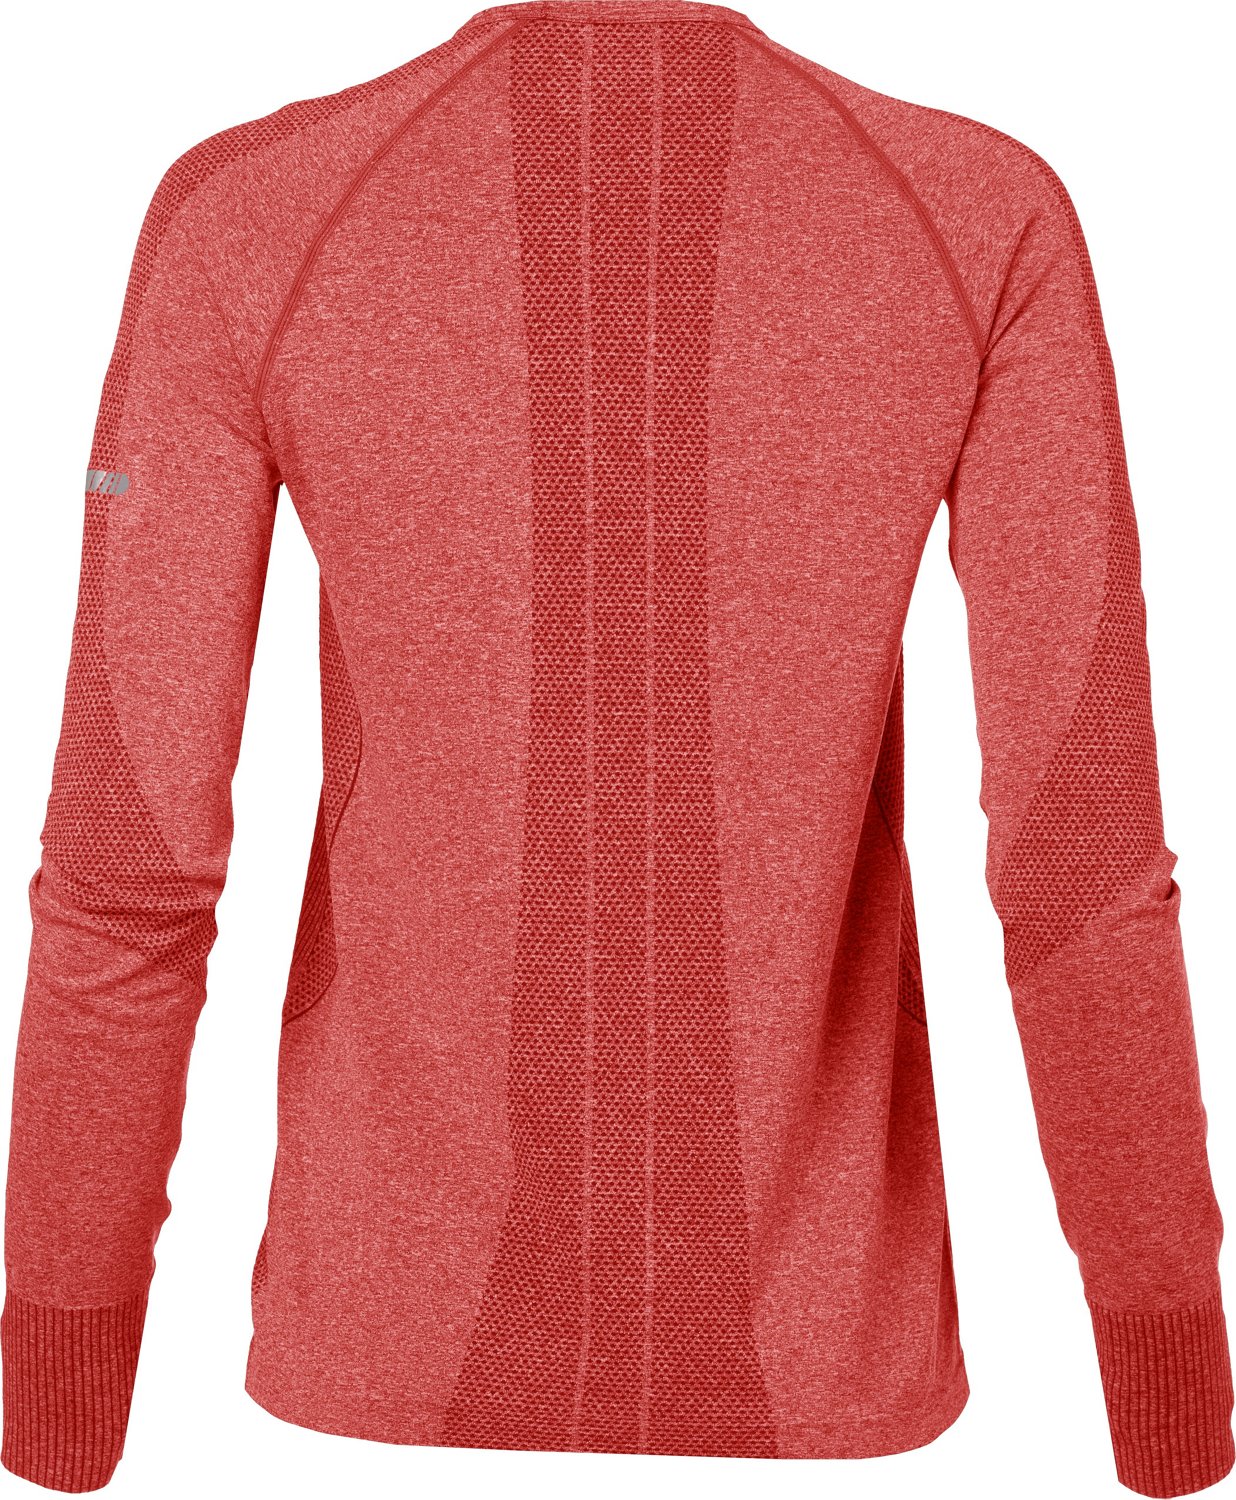 BCG Women's SMLS Crew Long Sleeve Shirt                                                                                          - view number 2